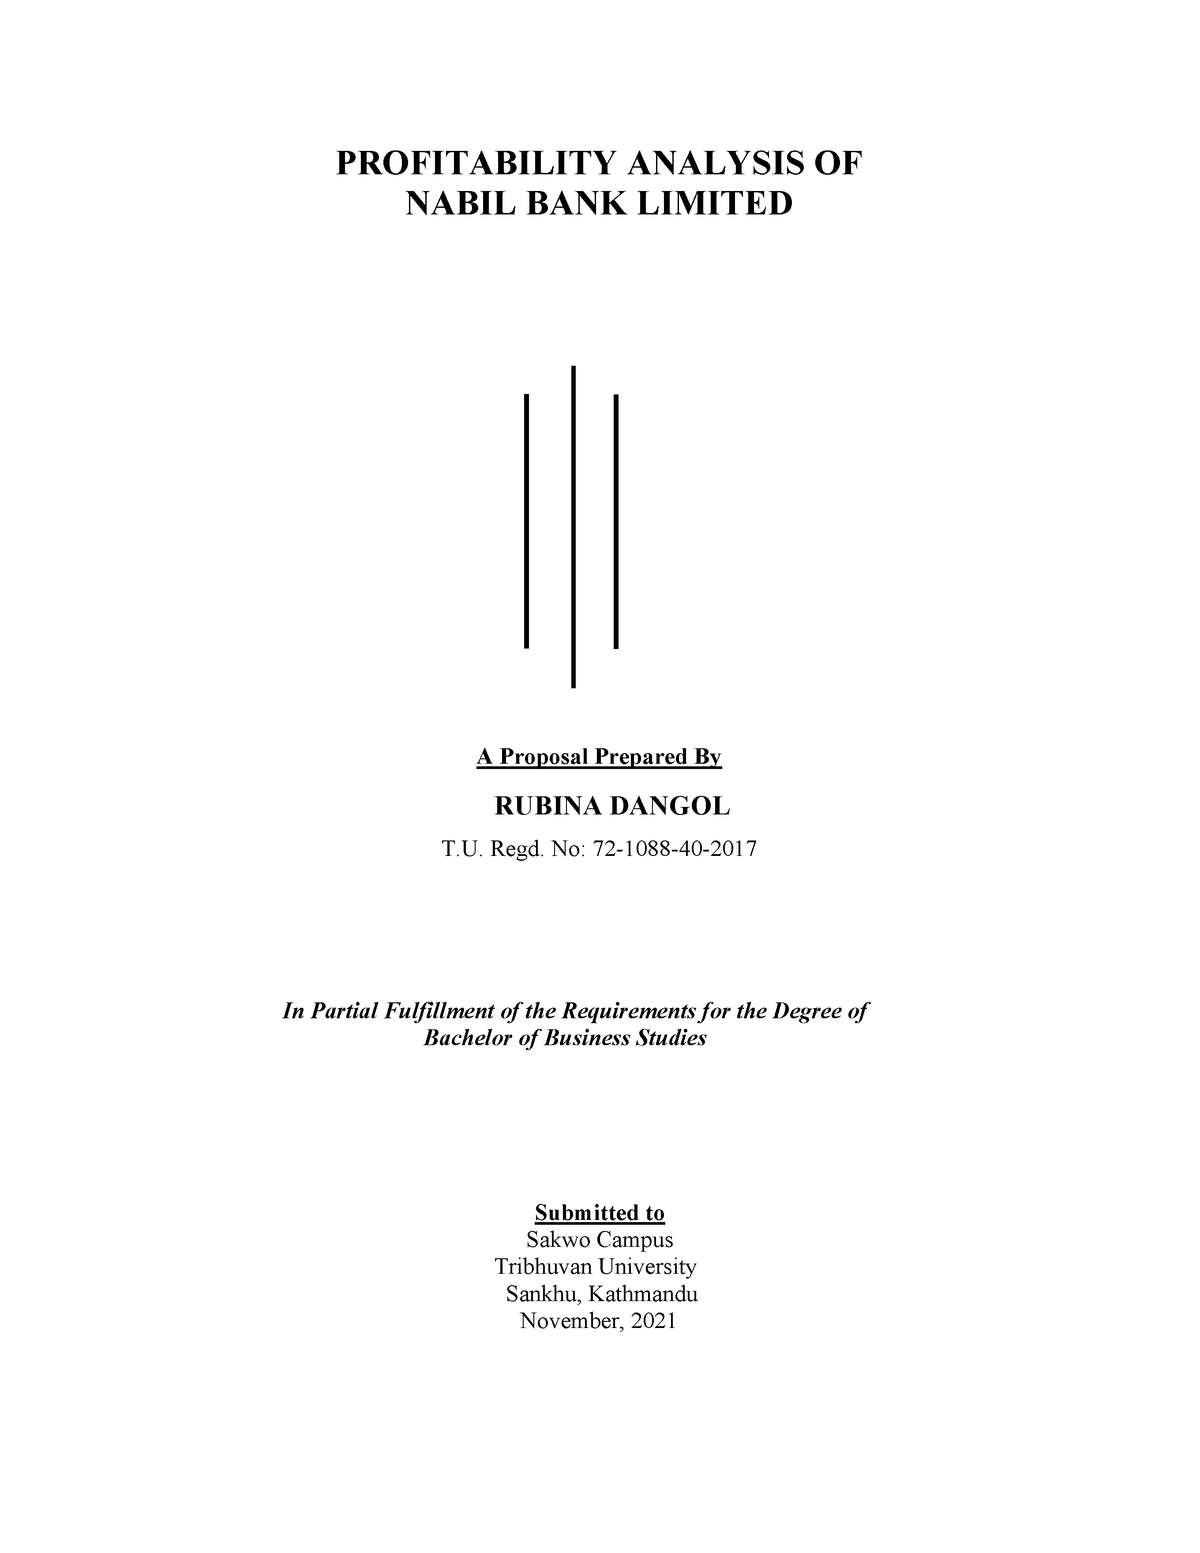 thesis on financial analysis of nabil bank